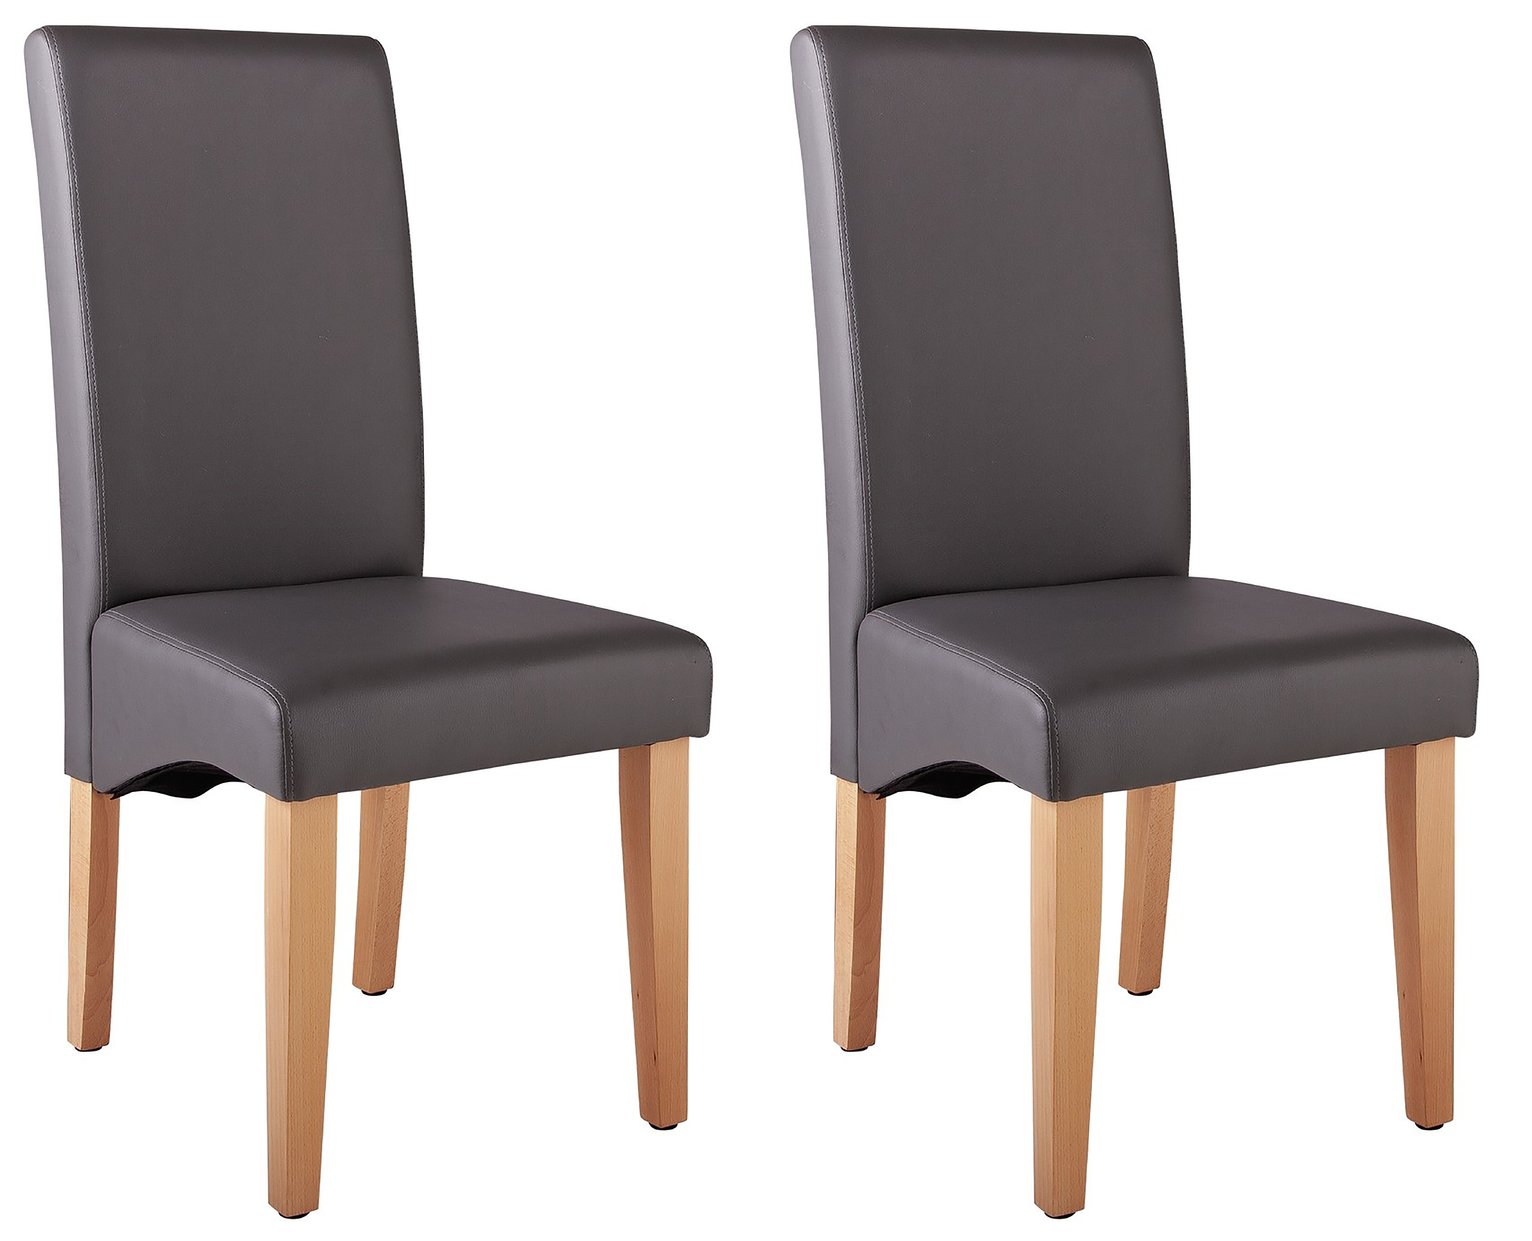 Argos Home Pair of Skirted Dining Chairs - Charcoal